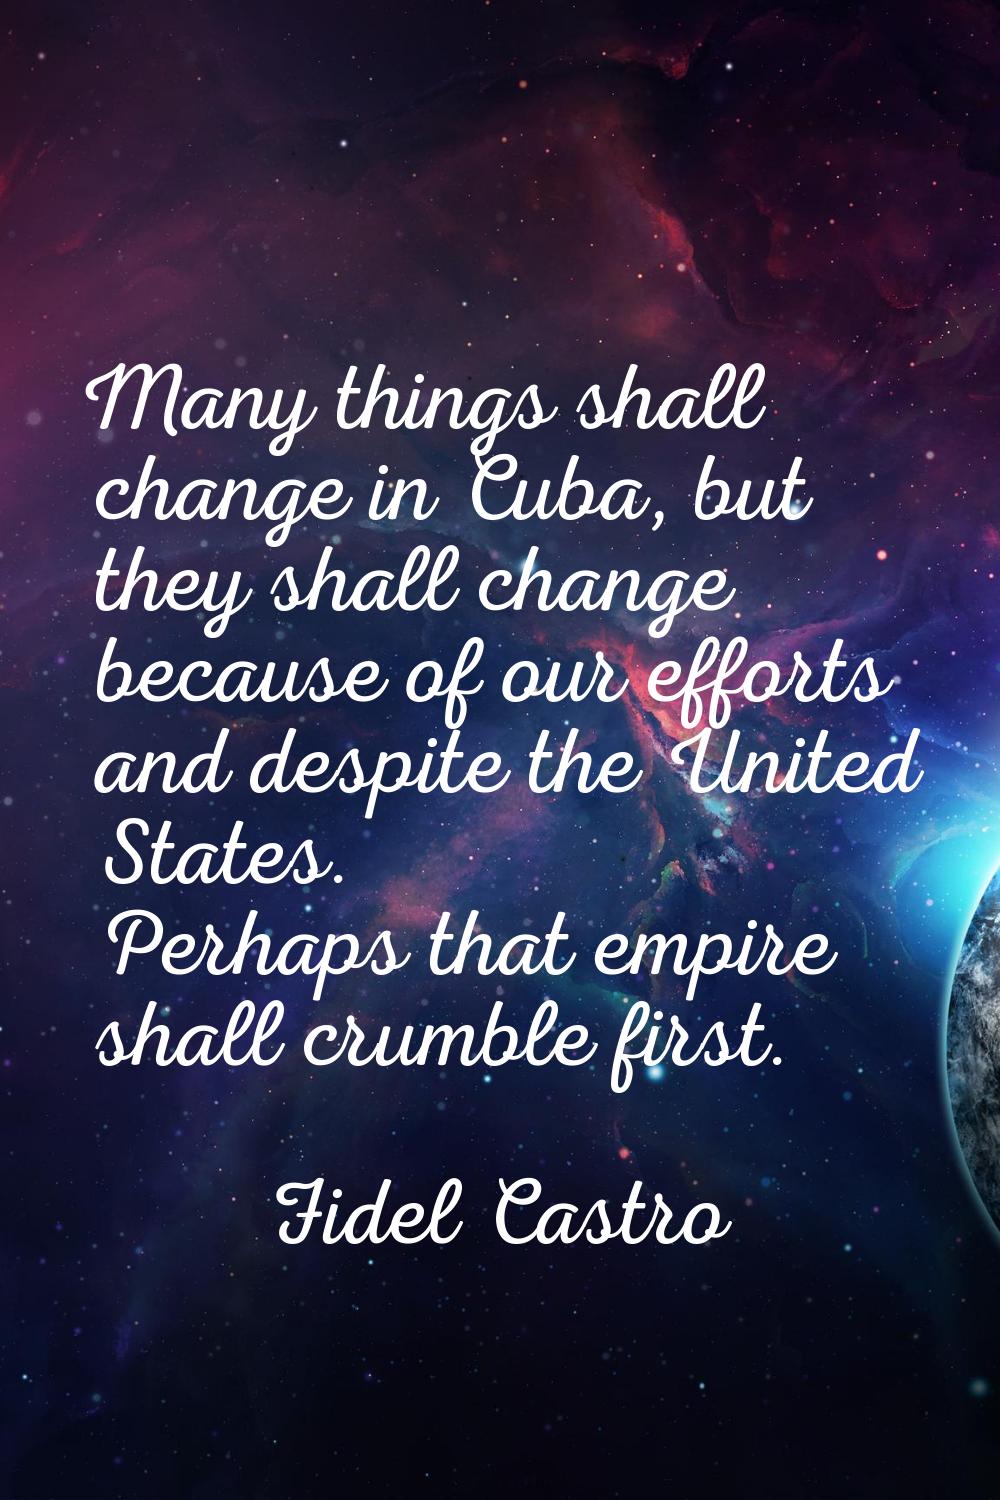 Many things shall change in Cuba, but they shall change because of our efforts and despite the Unit